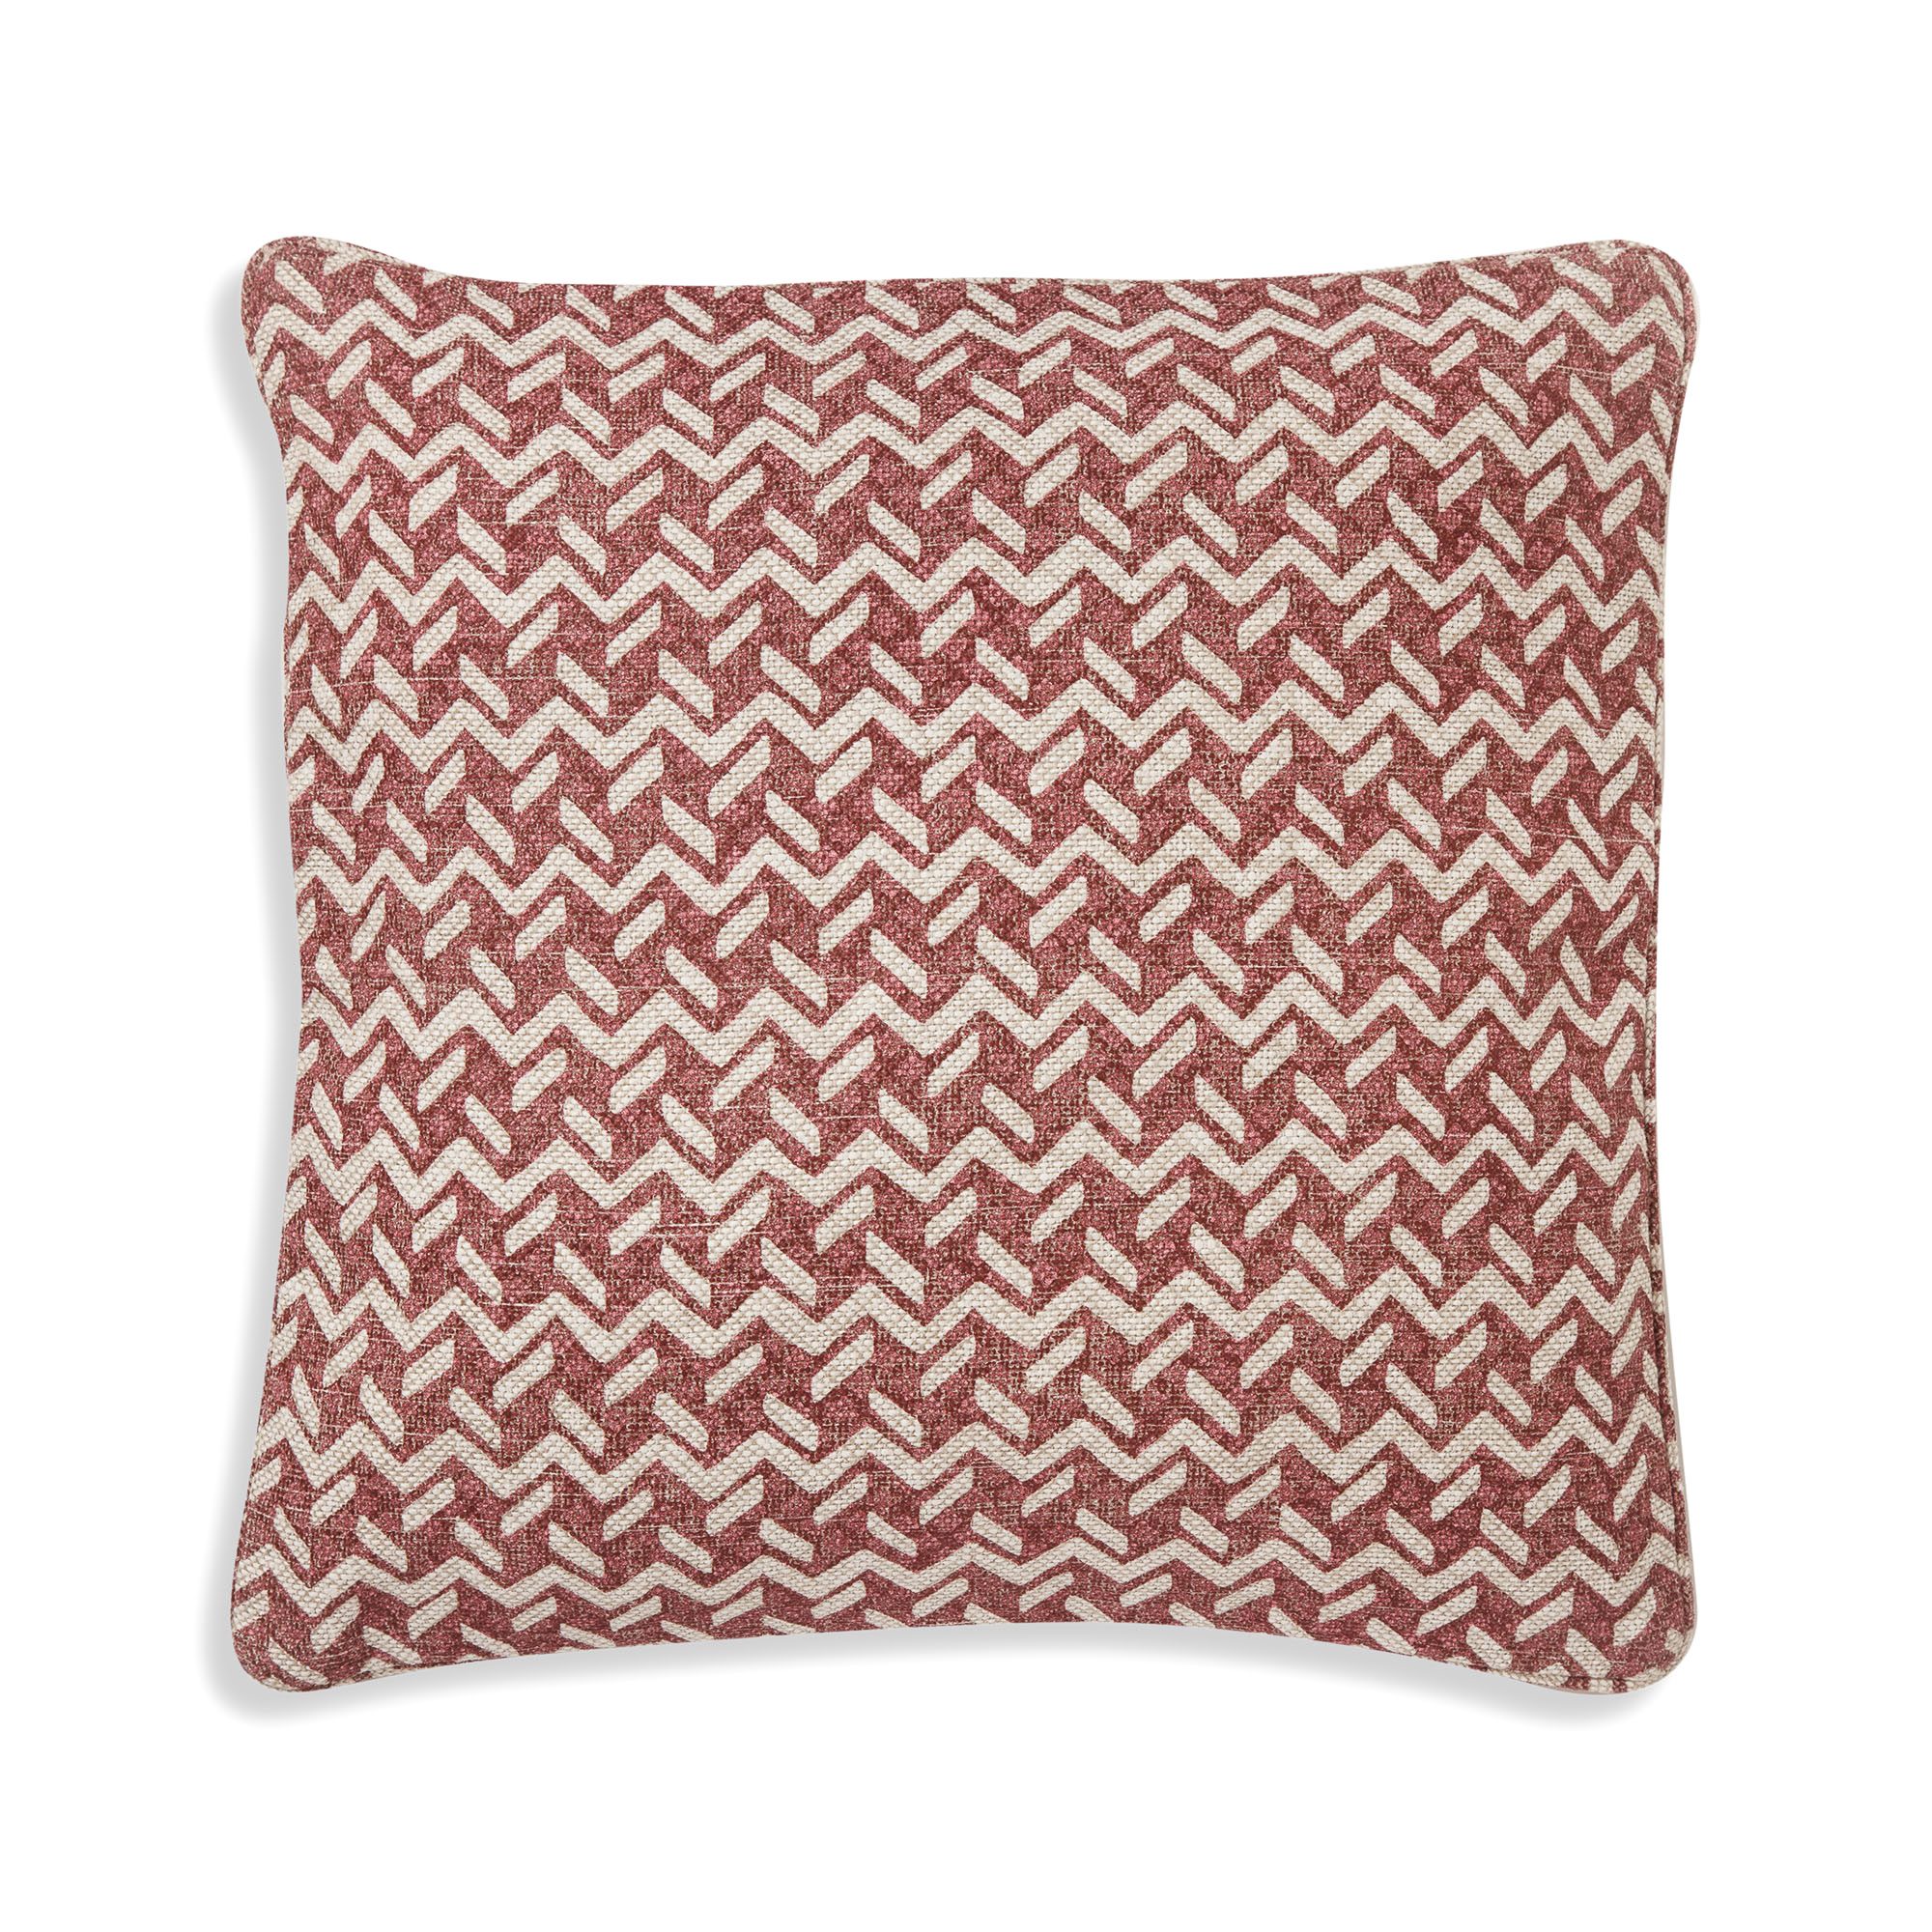 Large Square Cushion in Red Chiltern